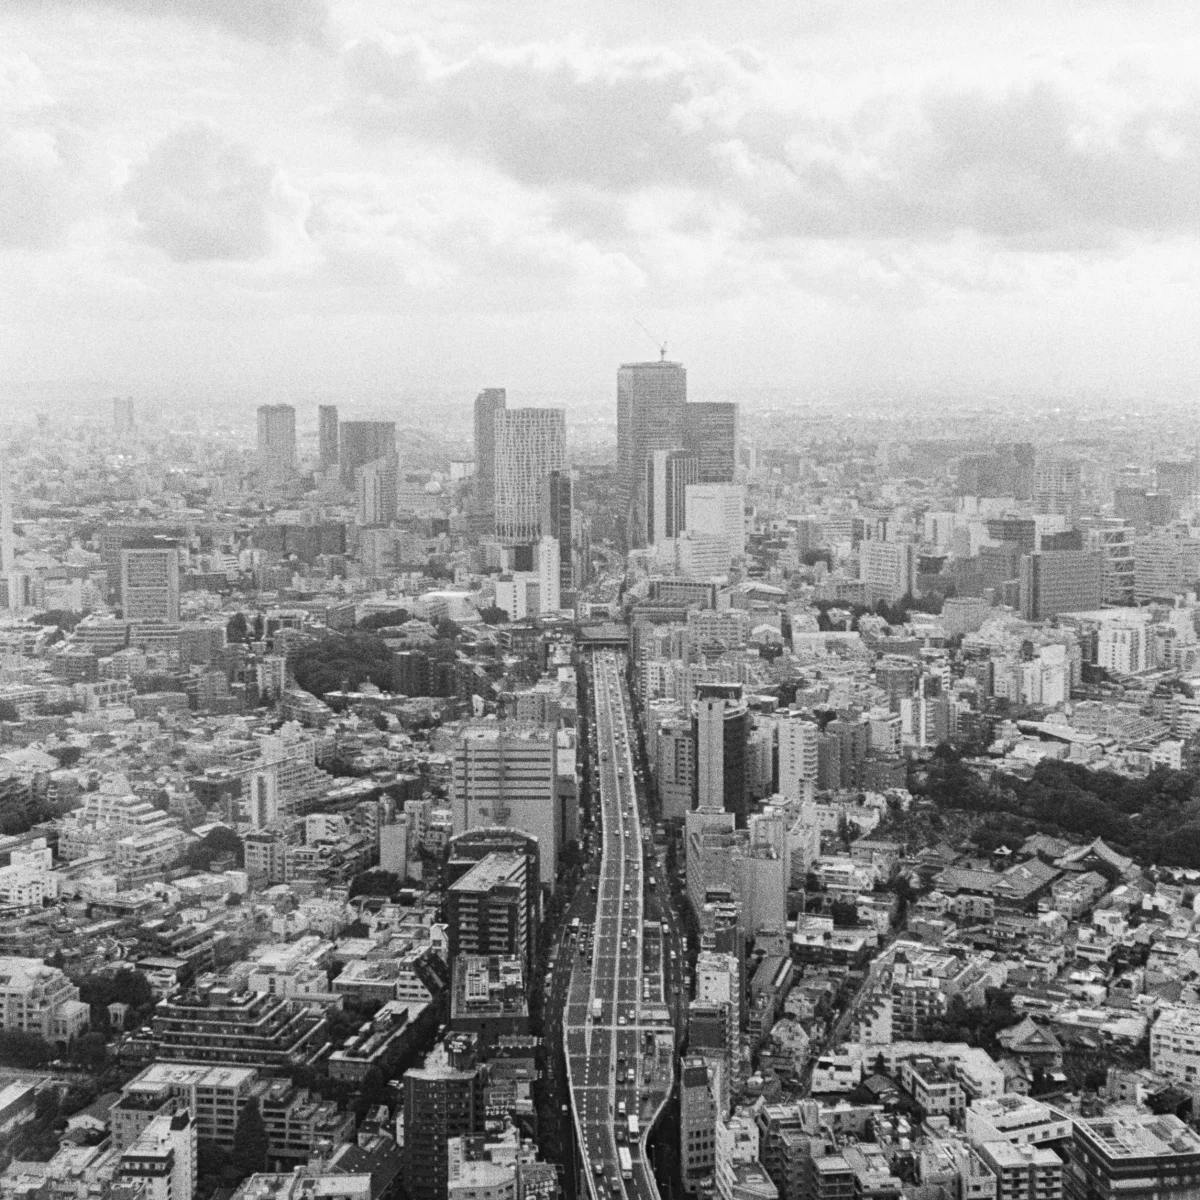 High-contrast black and white photograph of a cityscape captured on Ilford HP5+ film, featuring bold lines and shapes with a timeless and classic aesthetic.